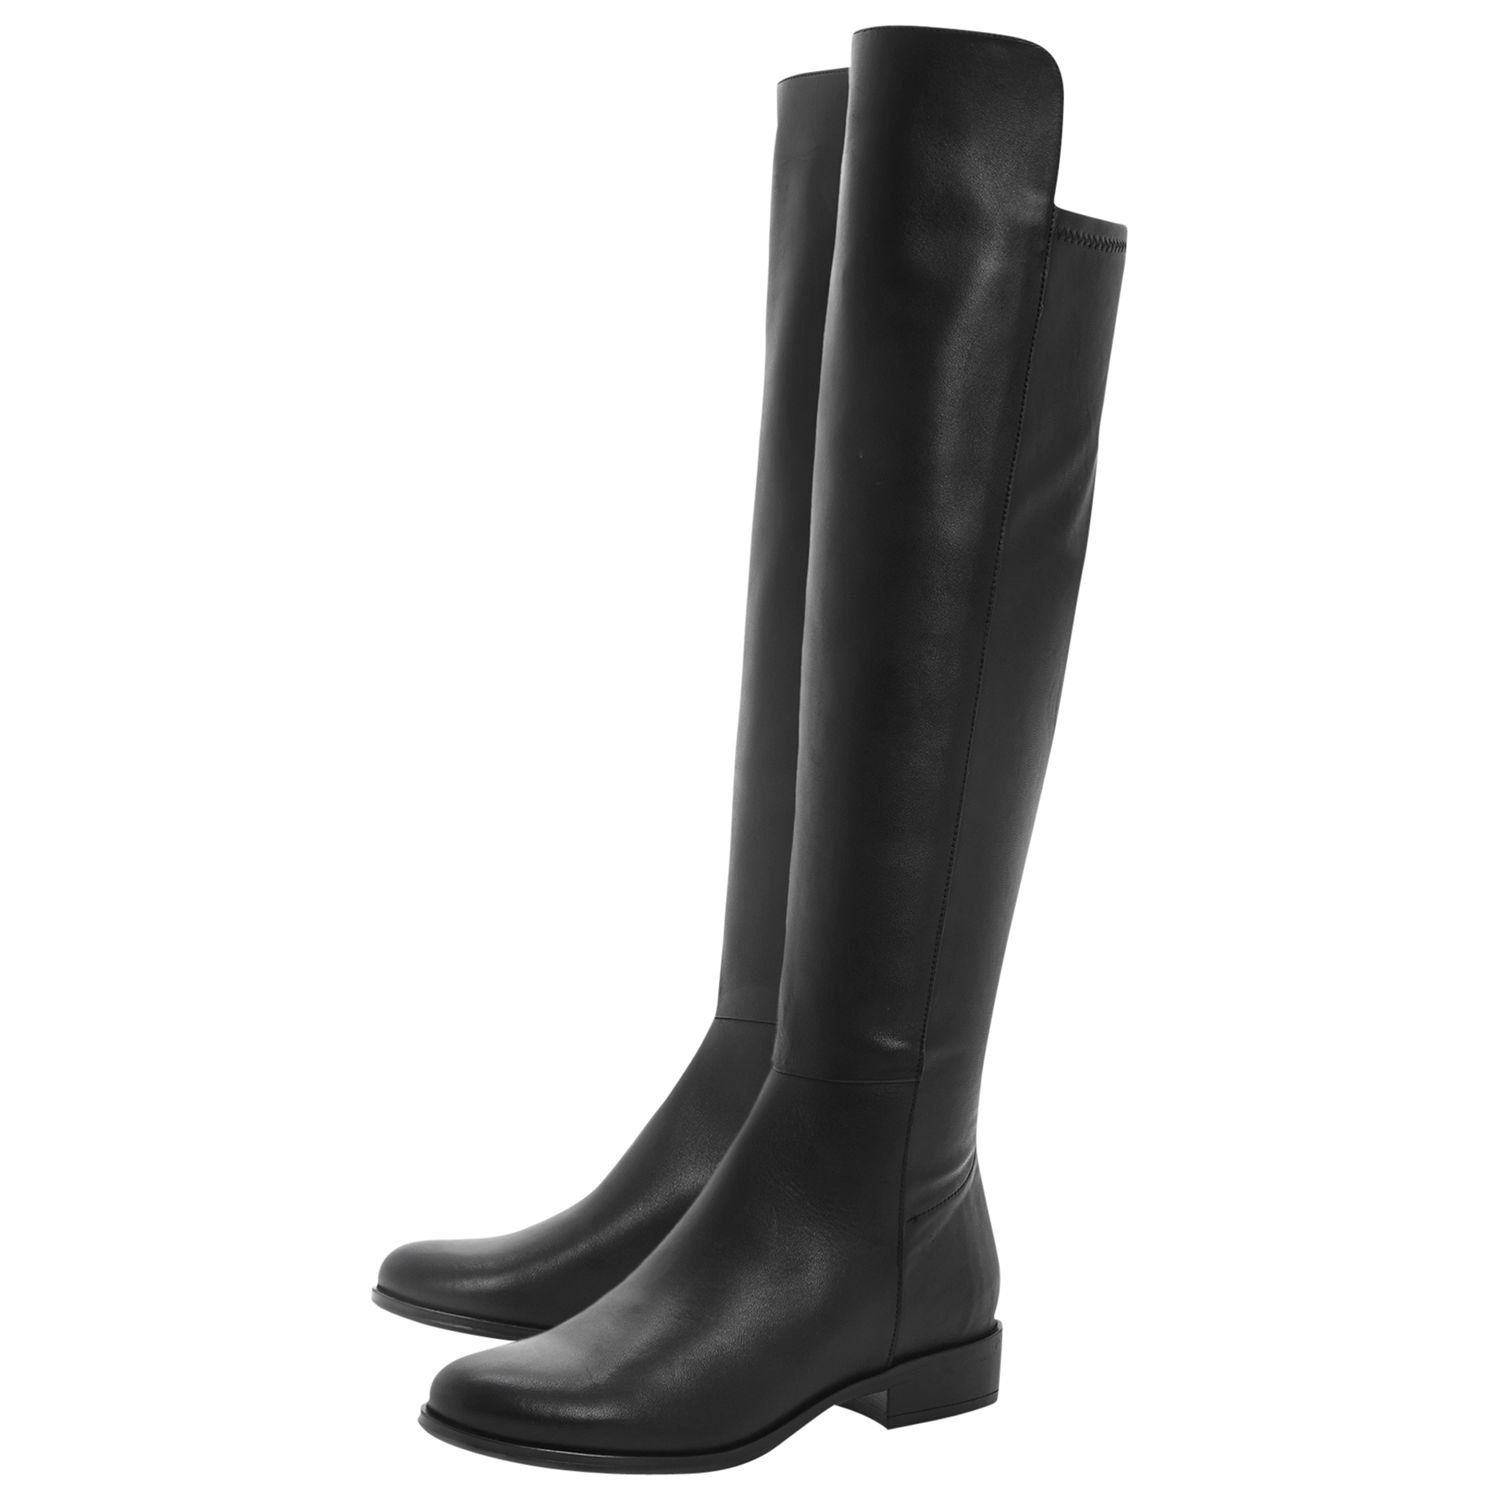 Dune Trish Over The Knee Boots, Black Leather